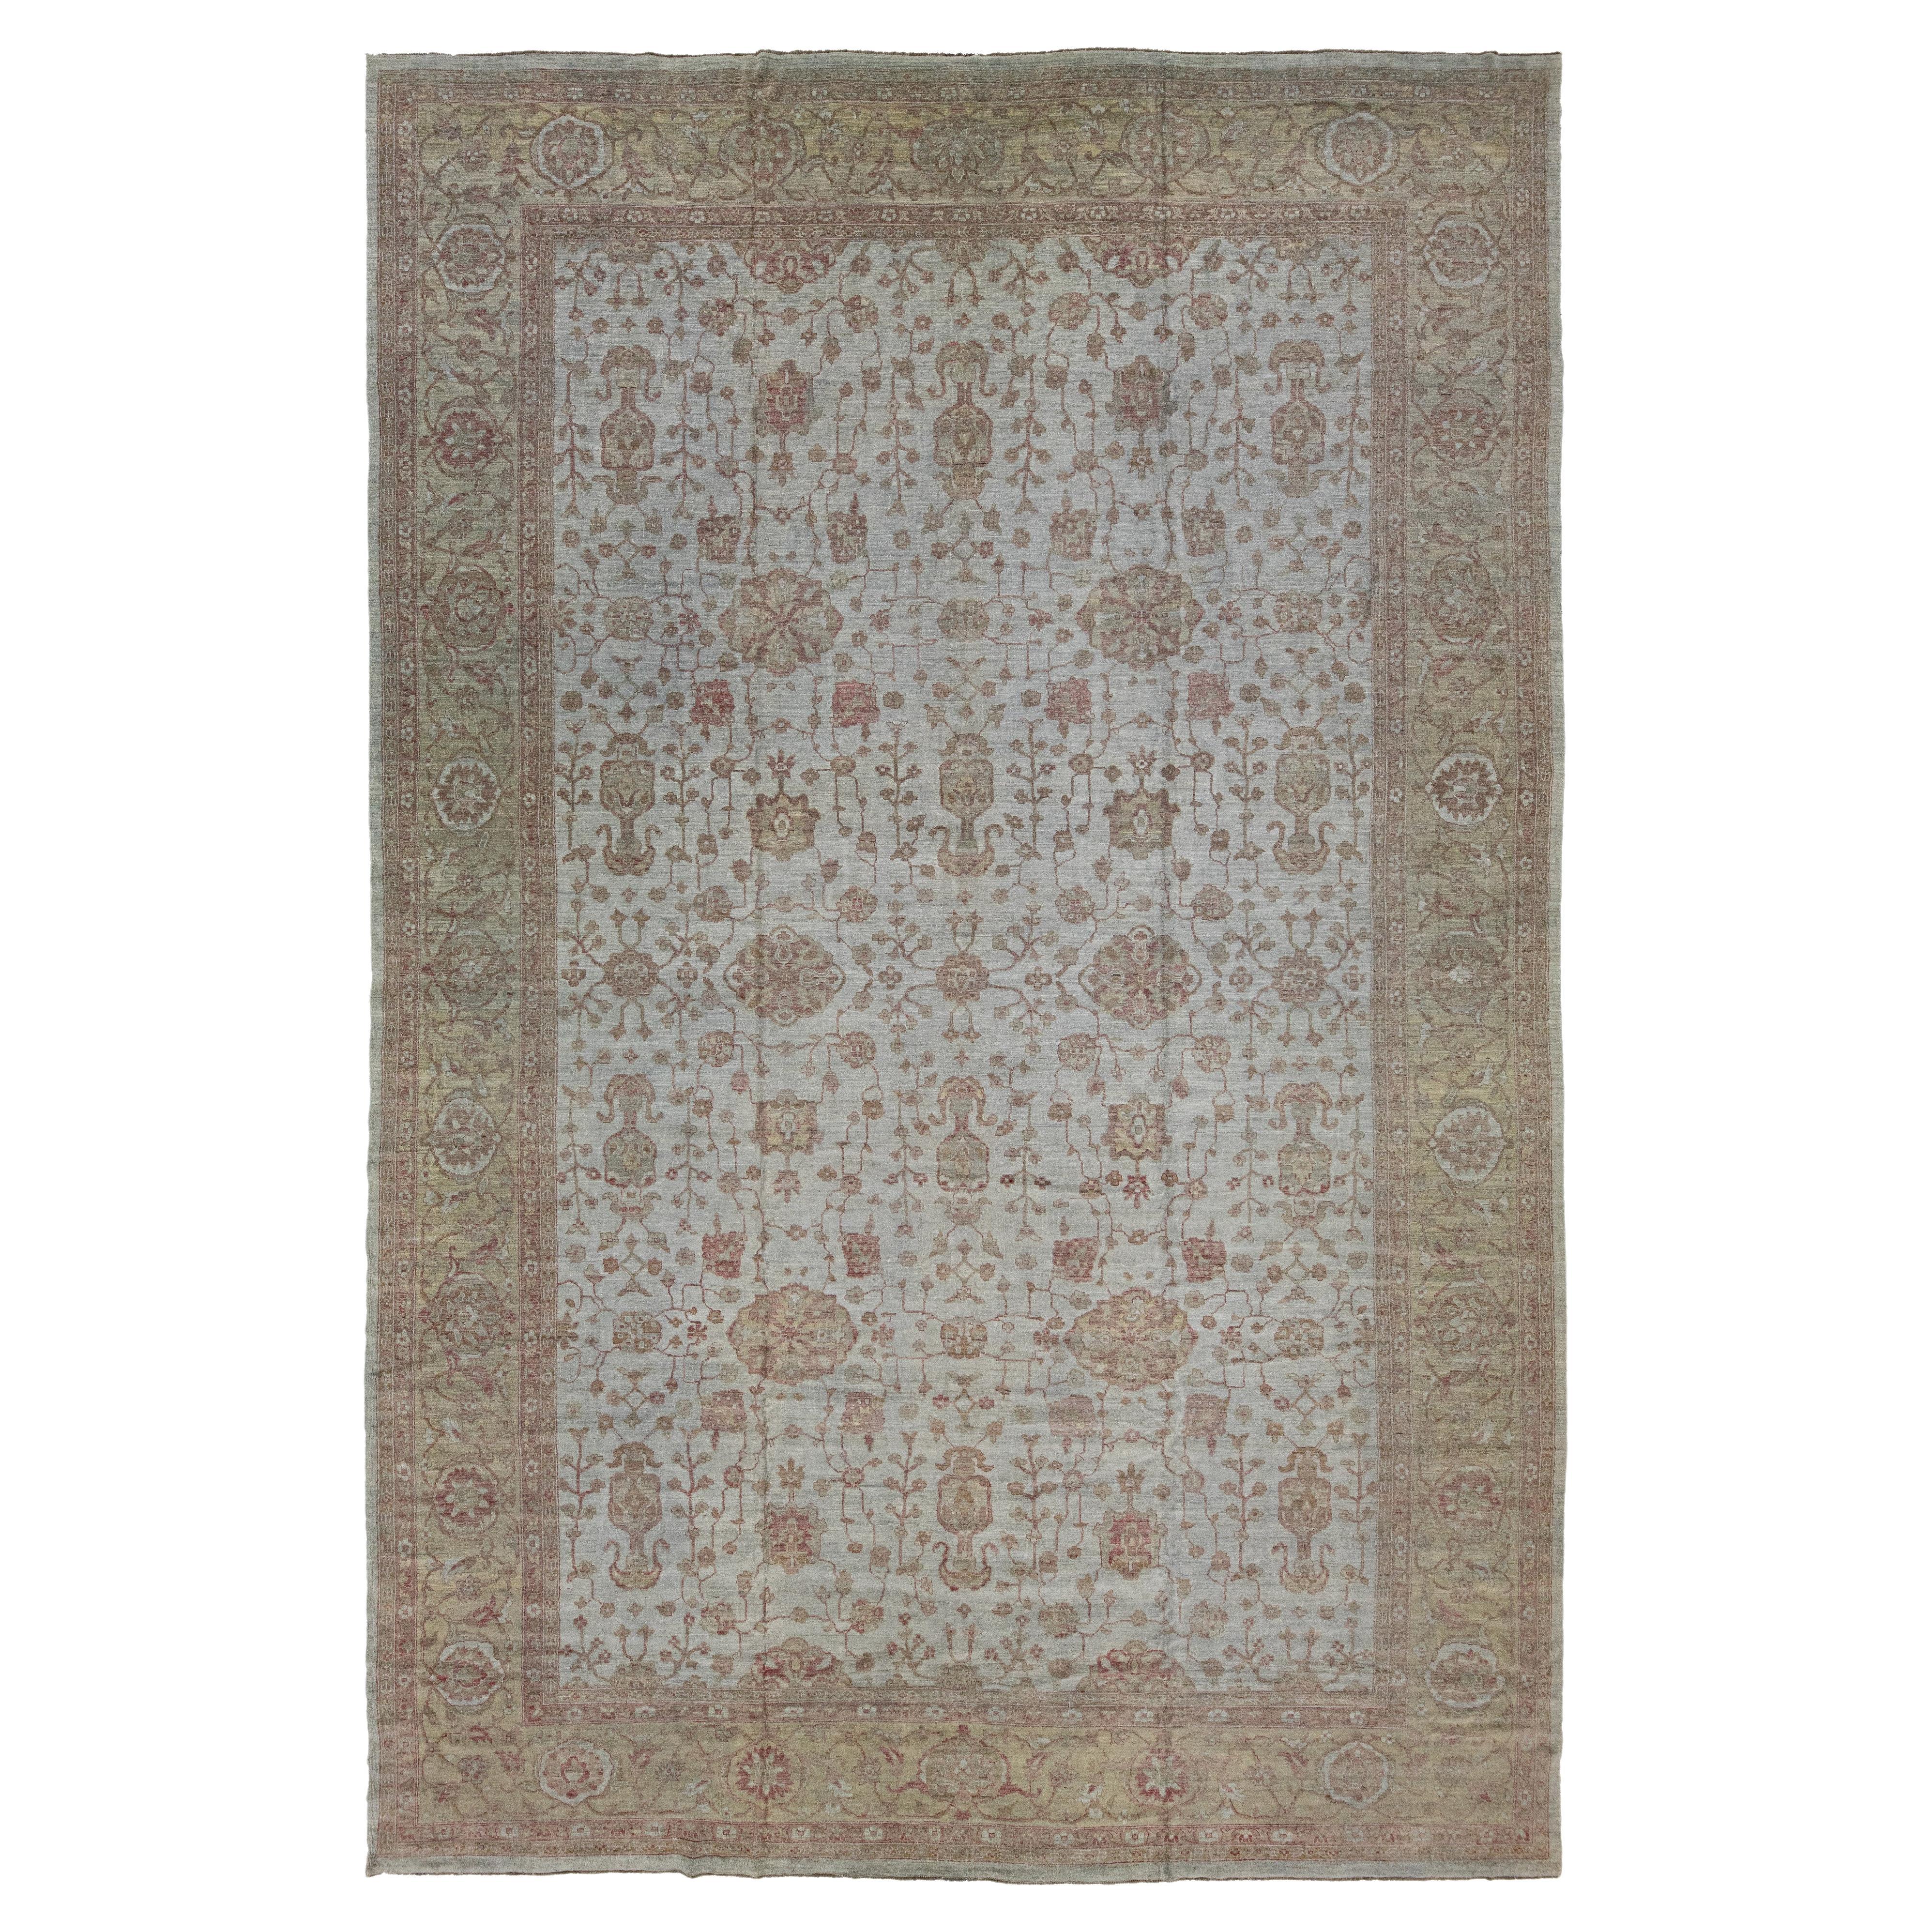 Oversized Modern Oushak Style Gray Wool Rug Features Allover Motif